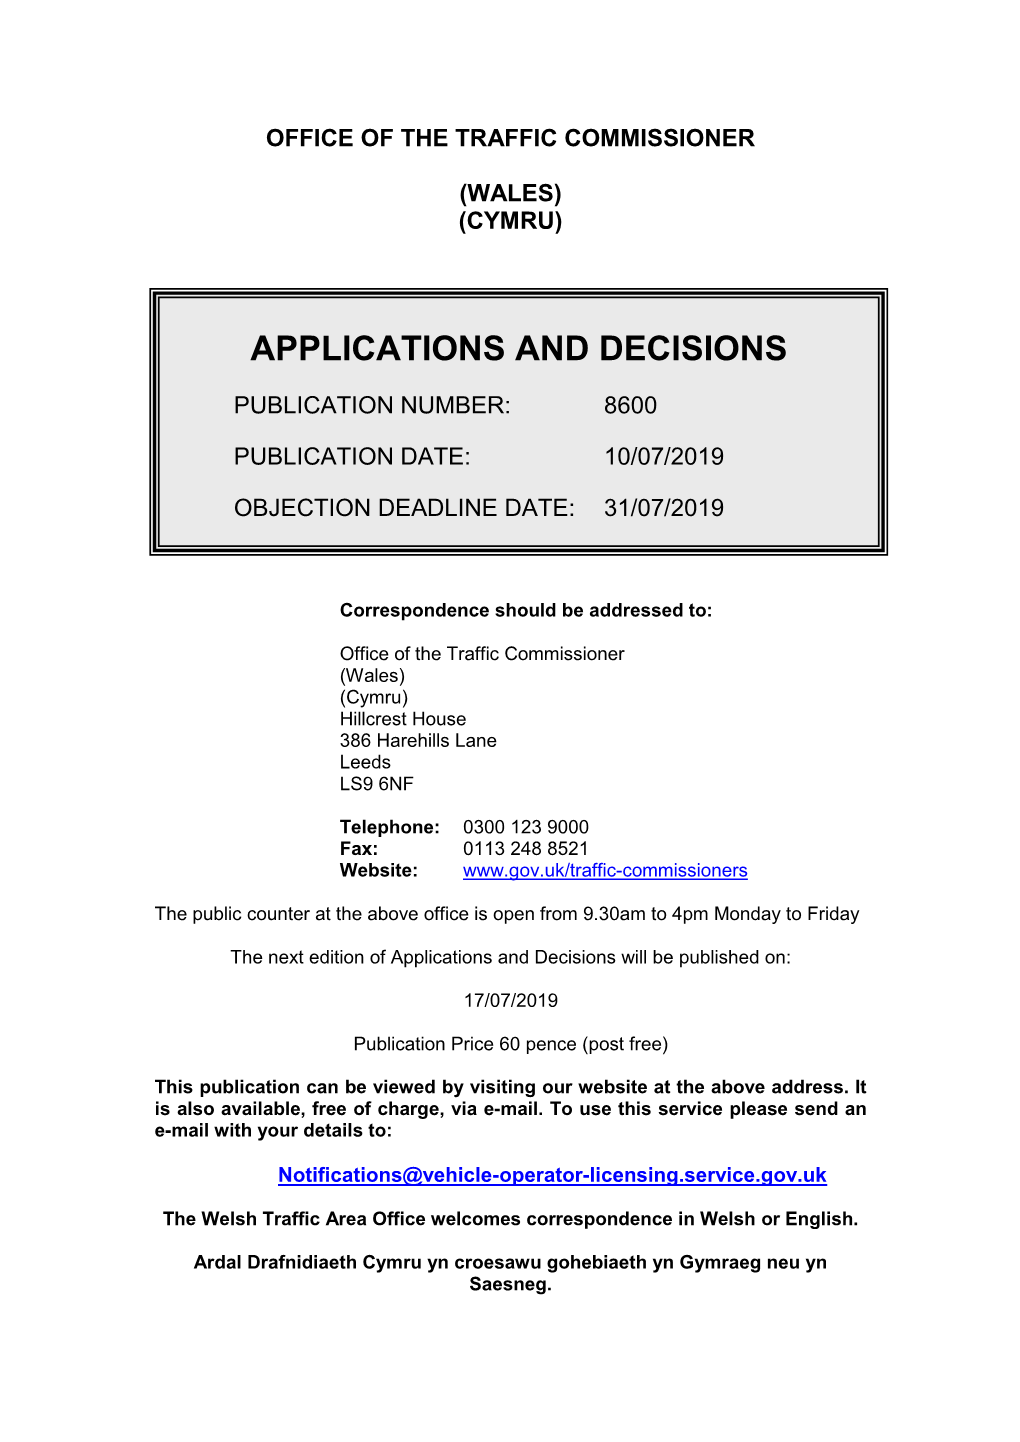 Applications and Decisions for Wales